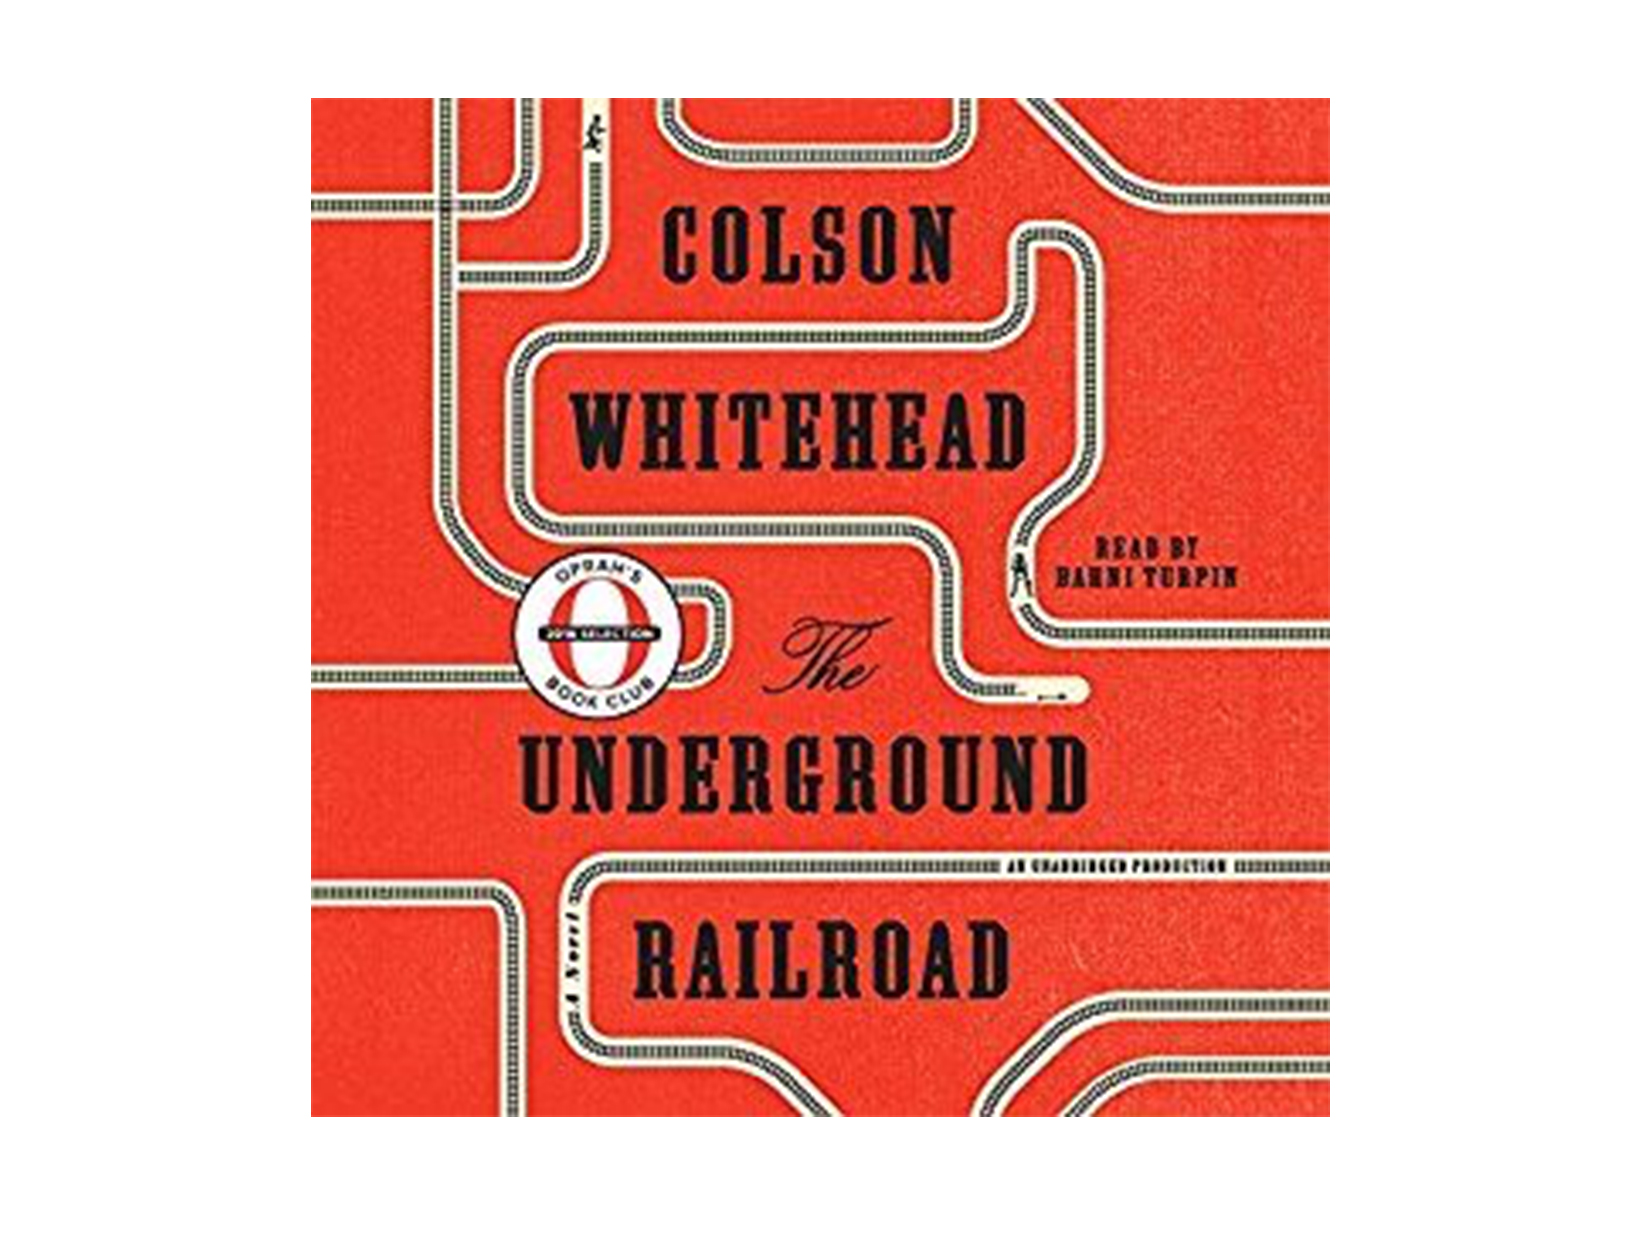 The Underground Railroad by Colson Whitehead, read by Bahni Turpin